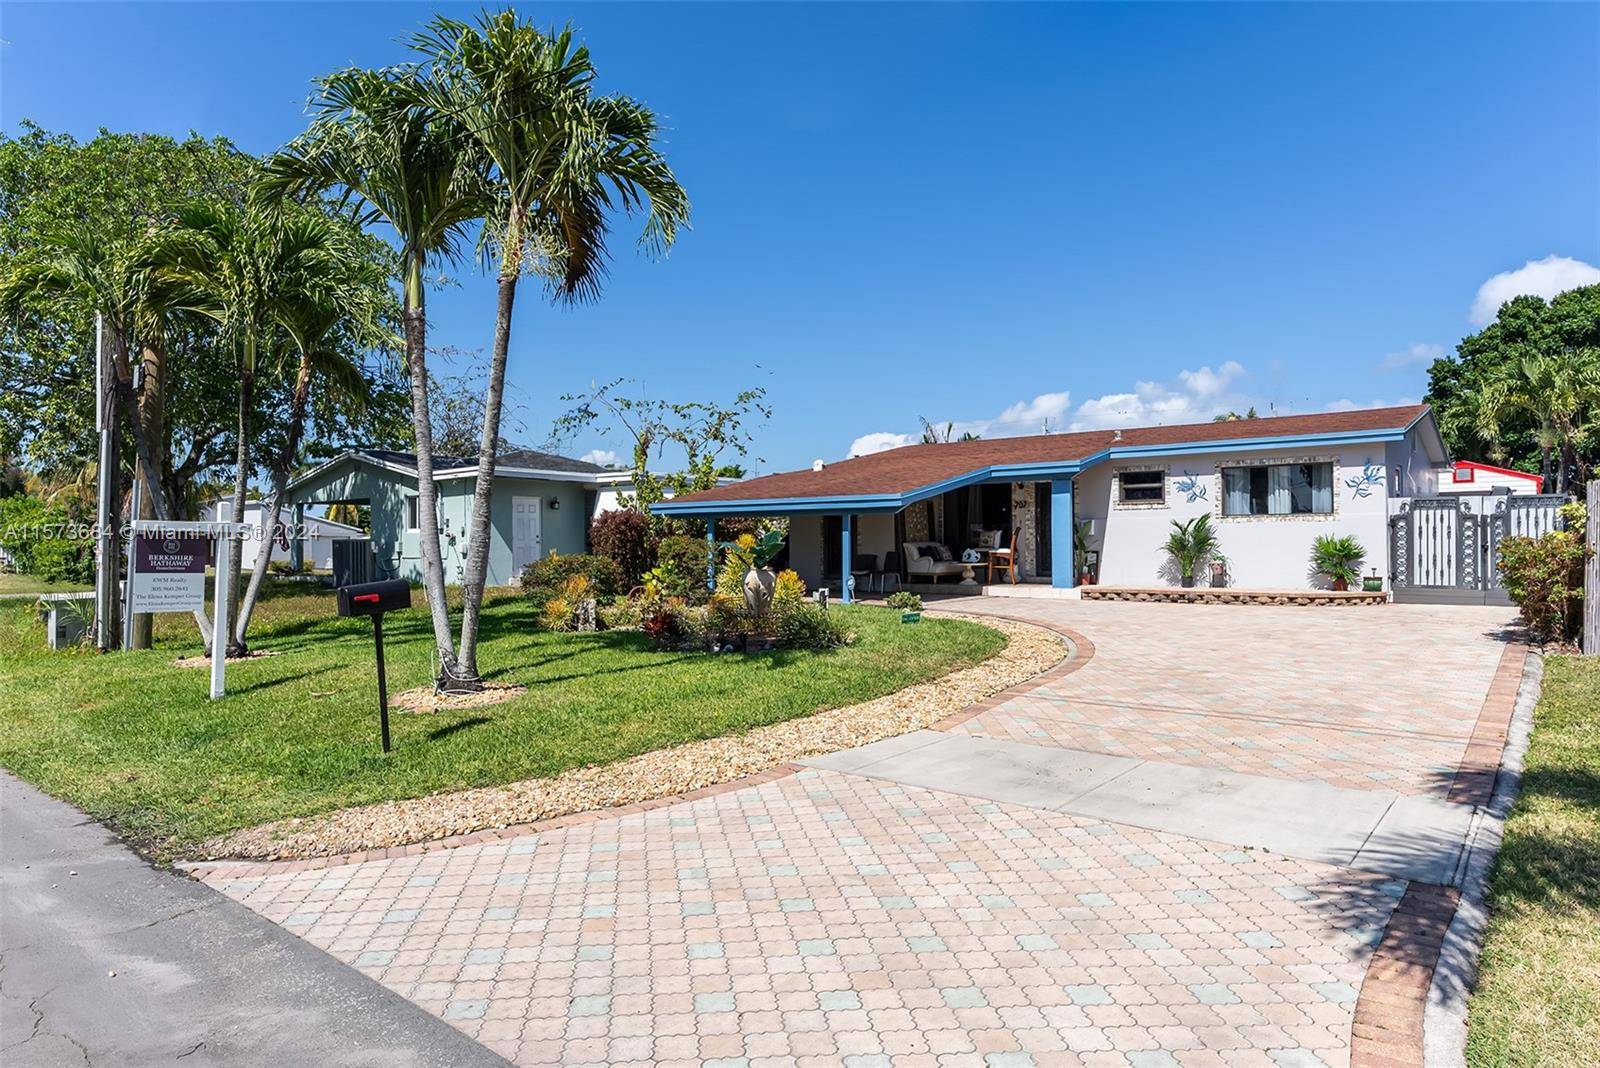 Amazing opportunity to purchase this income producing vacation property in heart of Hallandale, just minutes away from the beach and close to Ft.